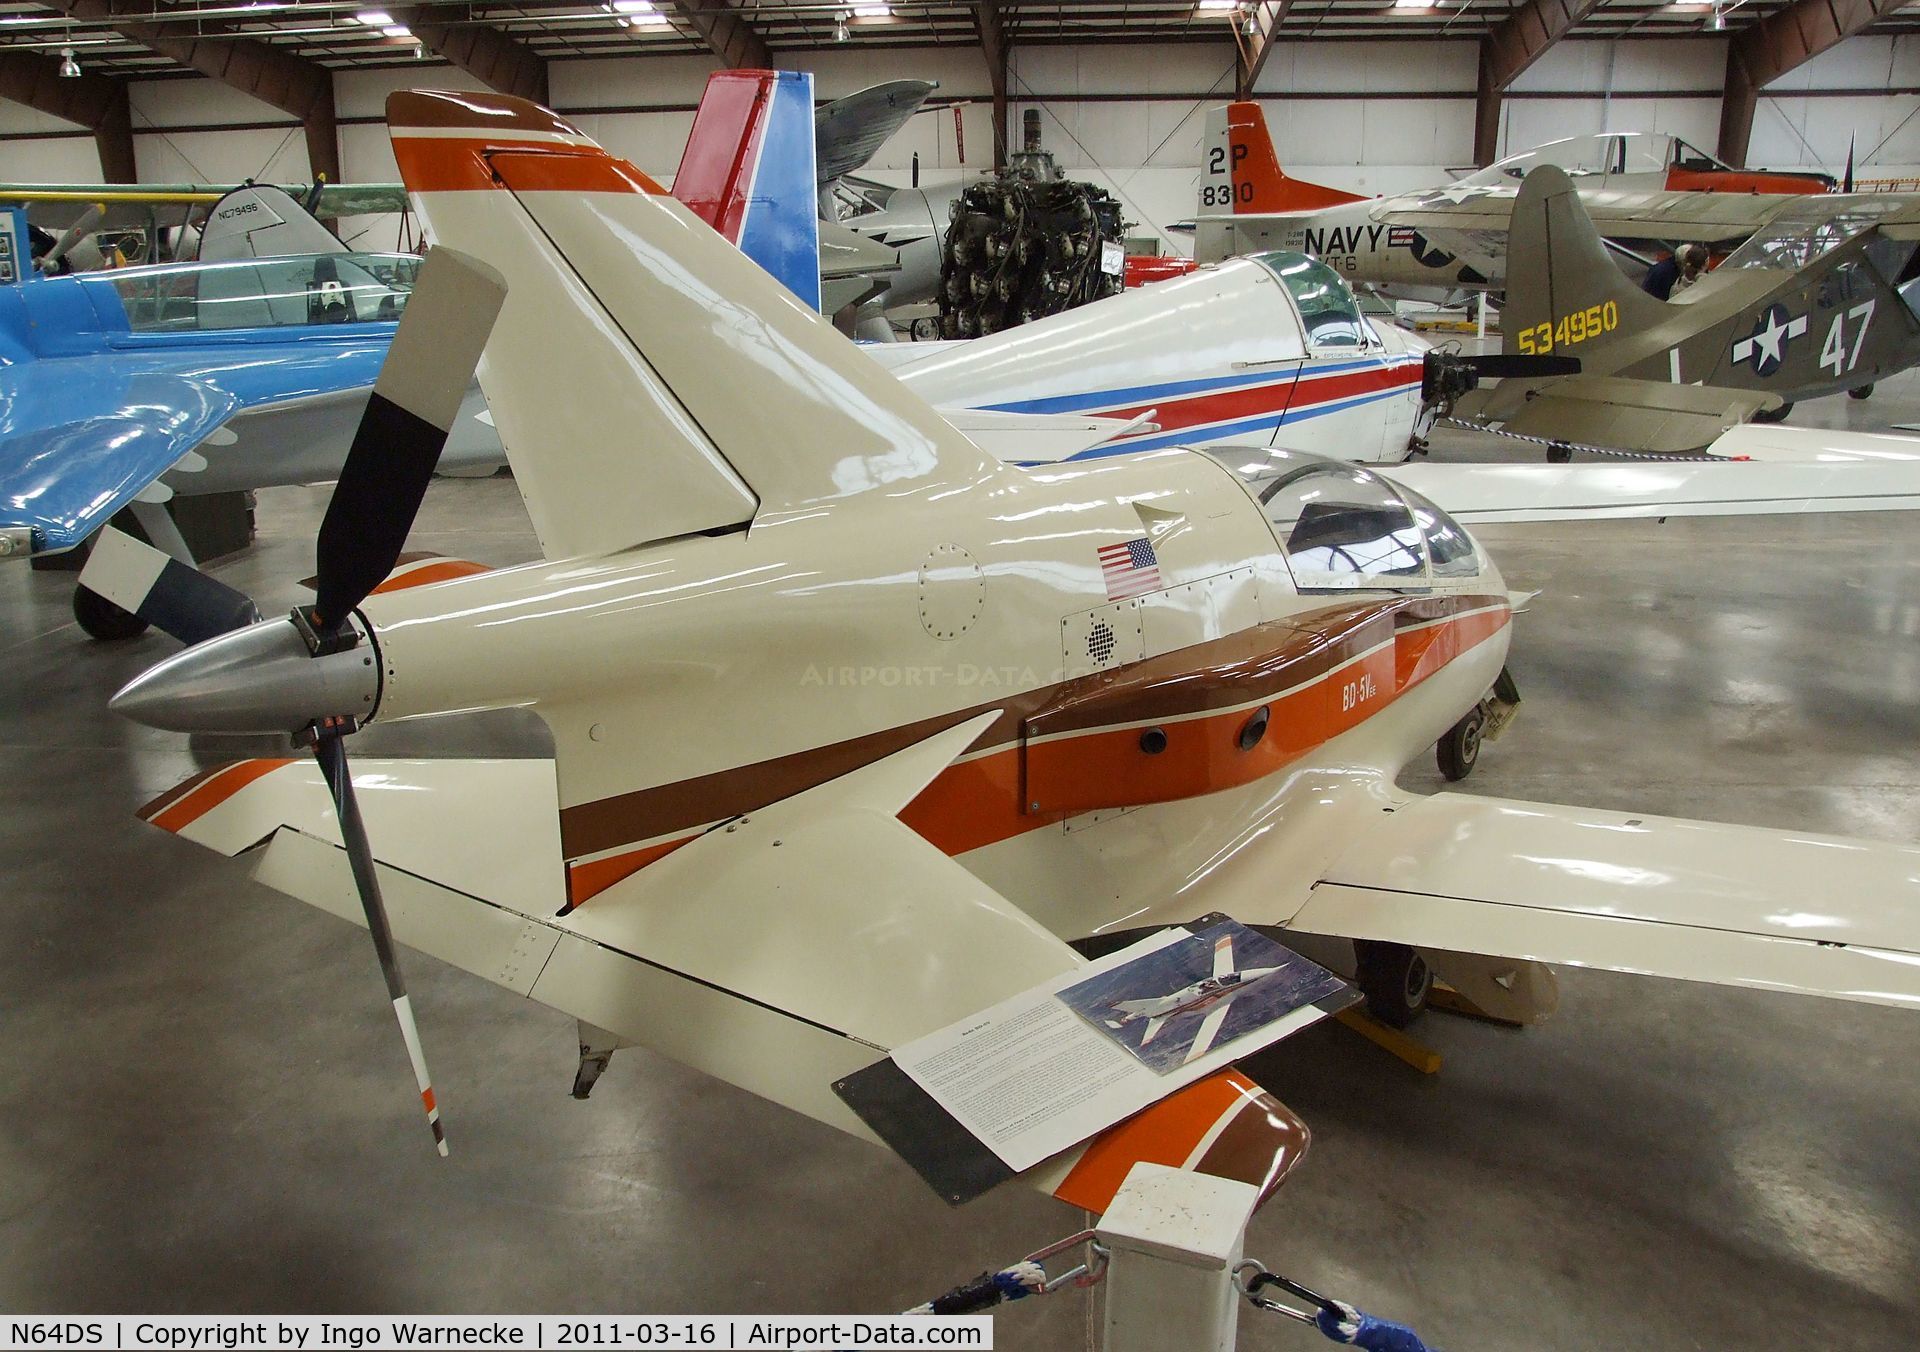 N64DS, Bede BD-5VEE C/N 1154, Bede (D.J. Sauser) BD-5VEE at the Planes of Fame Air Museum, Valle AZ